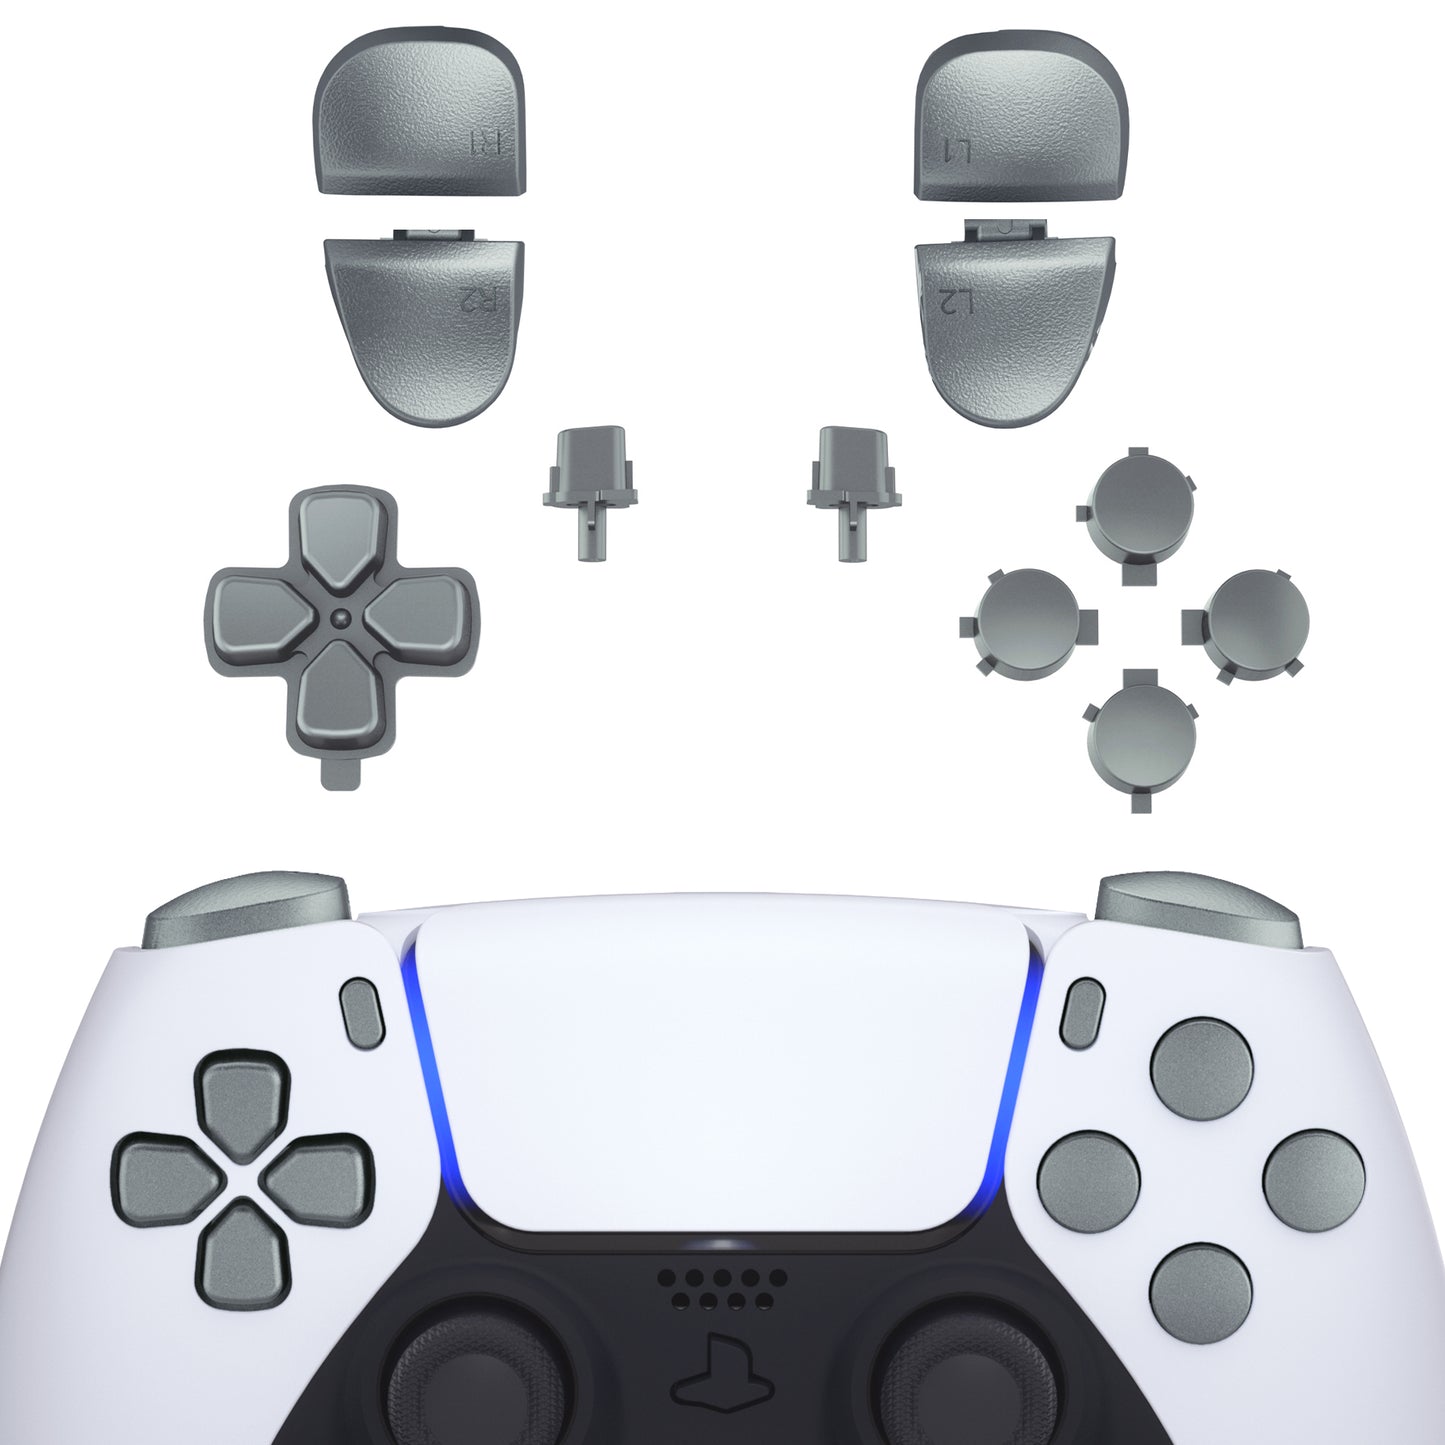 eXtremeRate Retail Replacement D-pad R1 L1 R2 L2 Triggers Share Options Face Buttons, Metallic Steel Gray Full Set Buttons Compatible with ps5 Controller BDM-030 - JPF1039G3